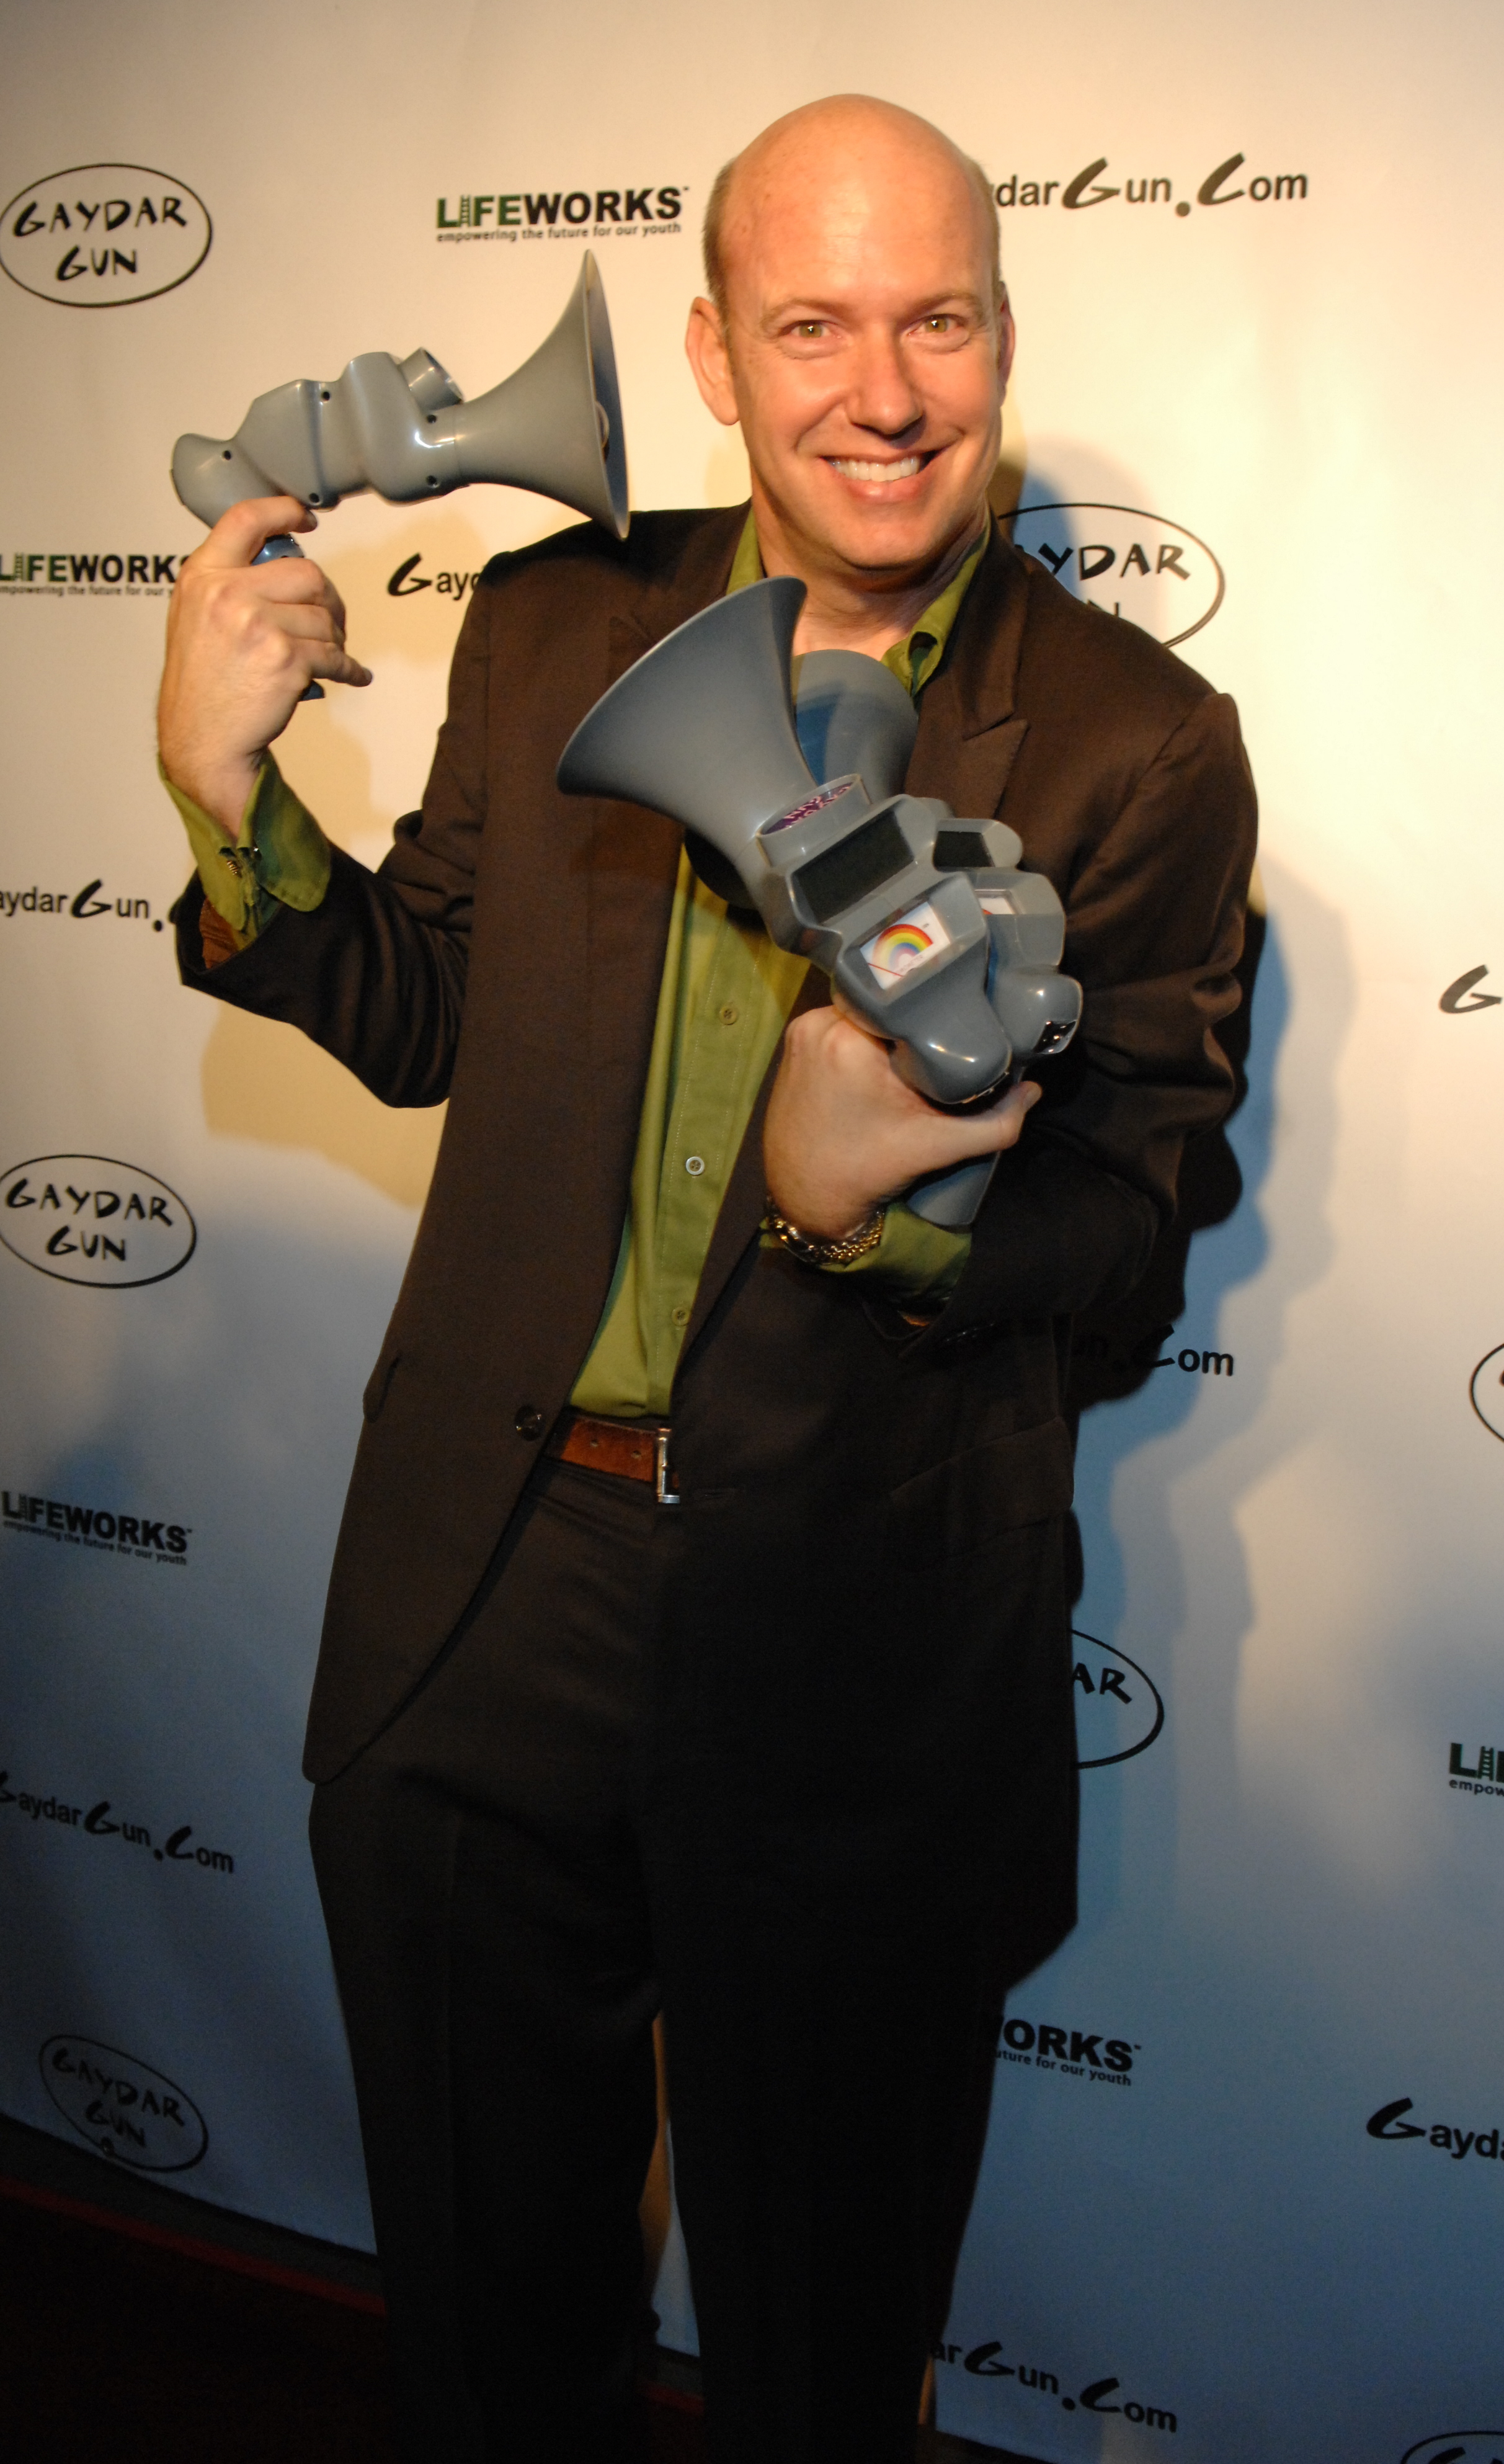 Terry Ray at Gaydar Gun launch party. Ray is one of the creators of the Gaydar Gun and is also its voice.